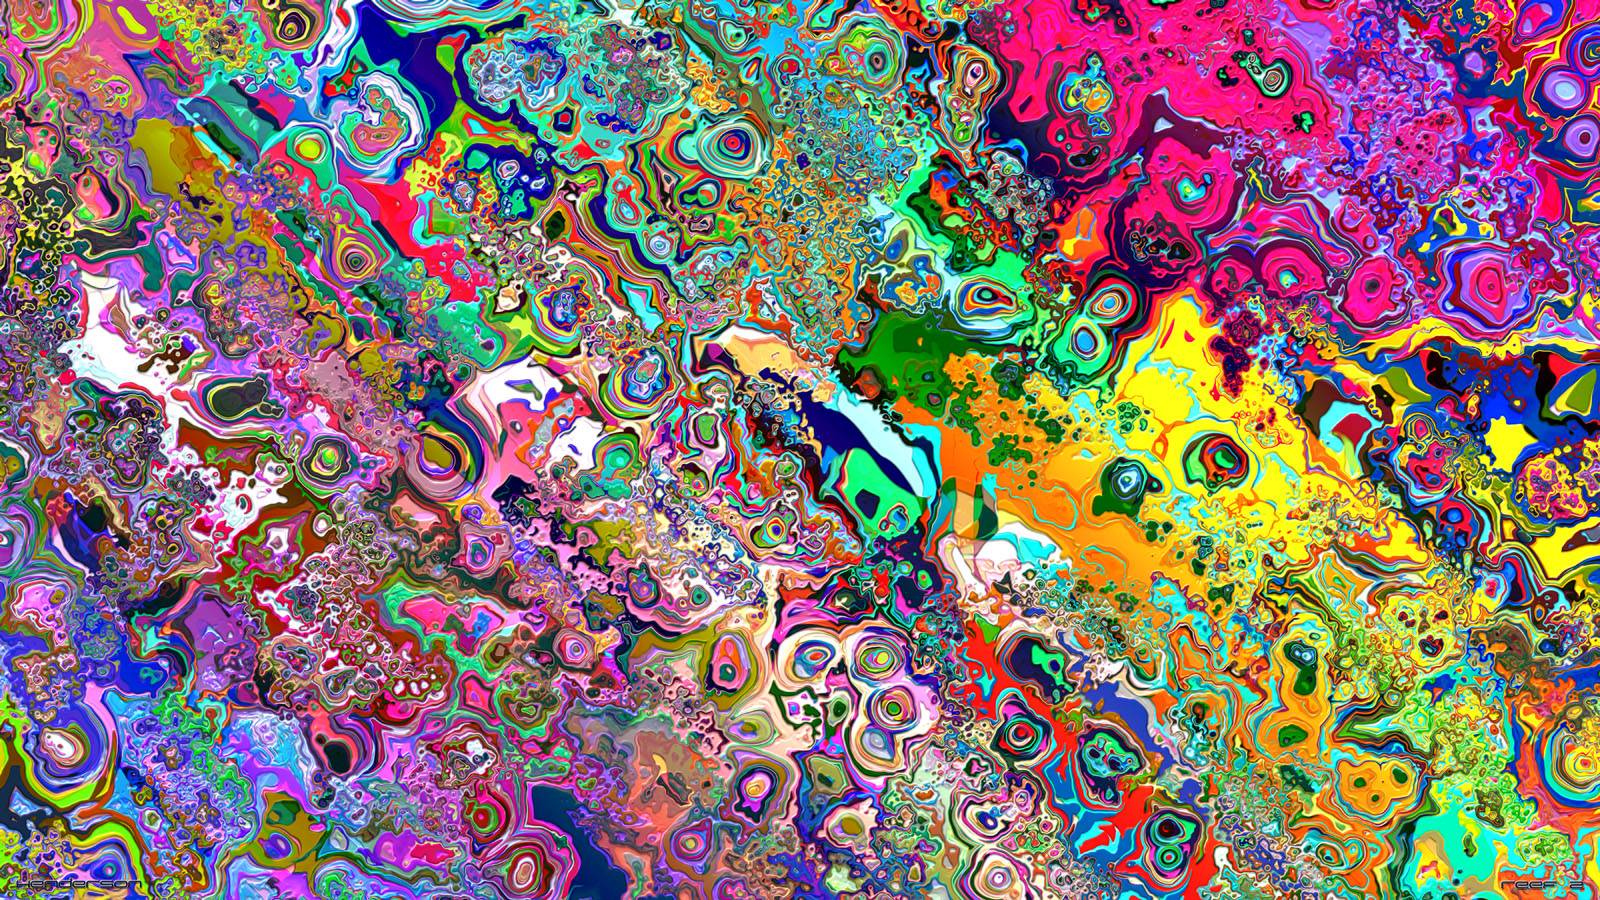 78+ Trippy Backgrounds For Twitter on WallpaperSafari